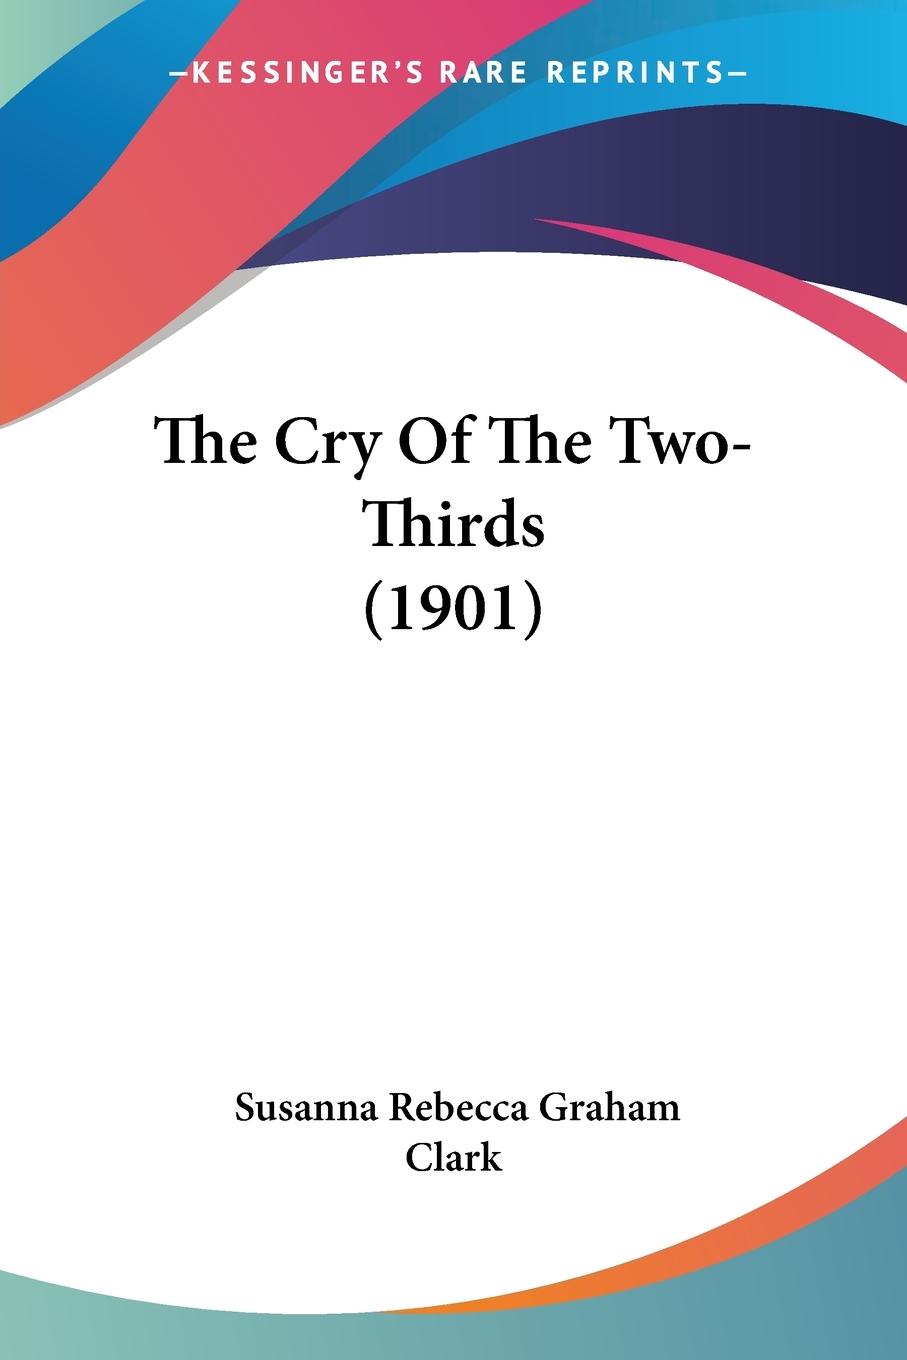 The Cry Of The Two-Thirds (1901) - Clark, Susanna Rebecca Graham